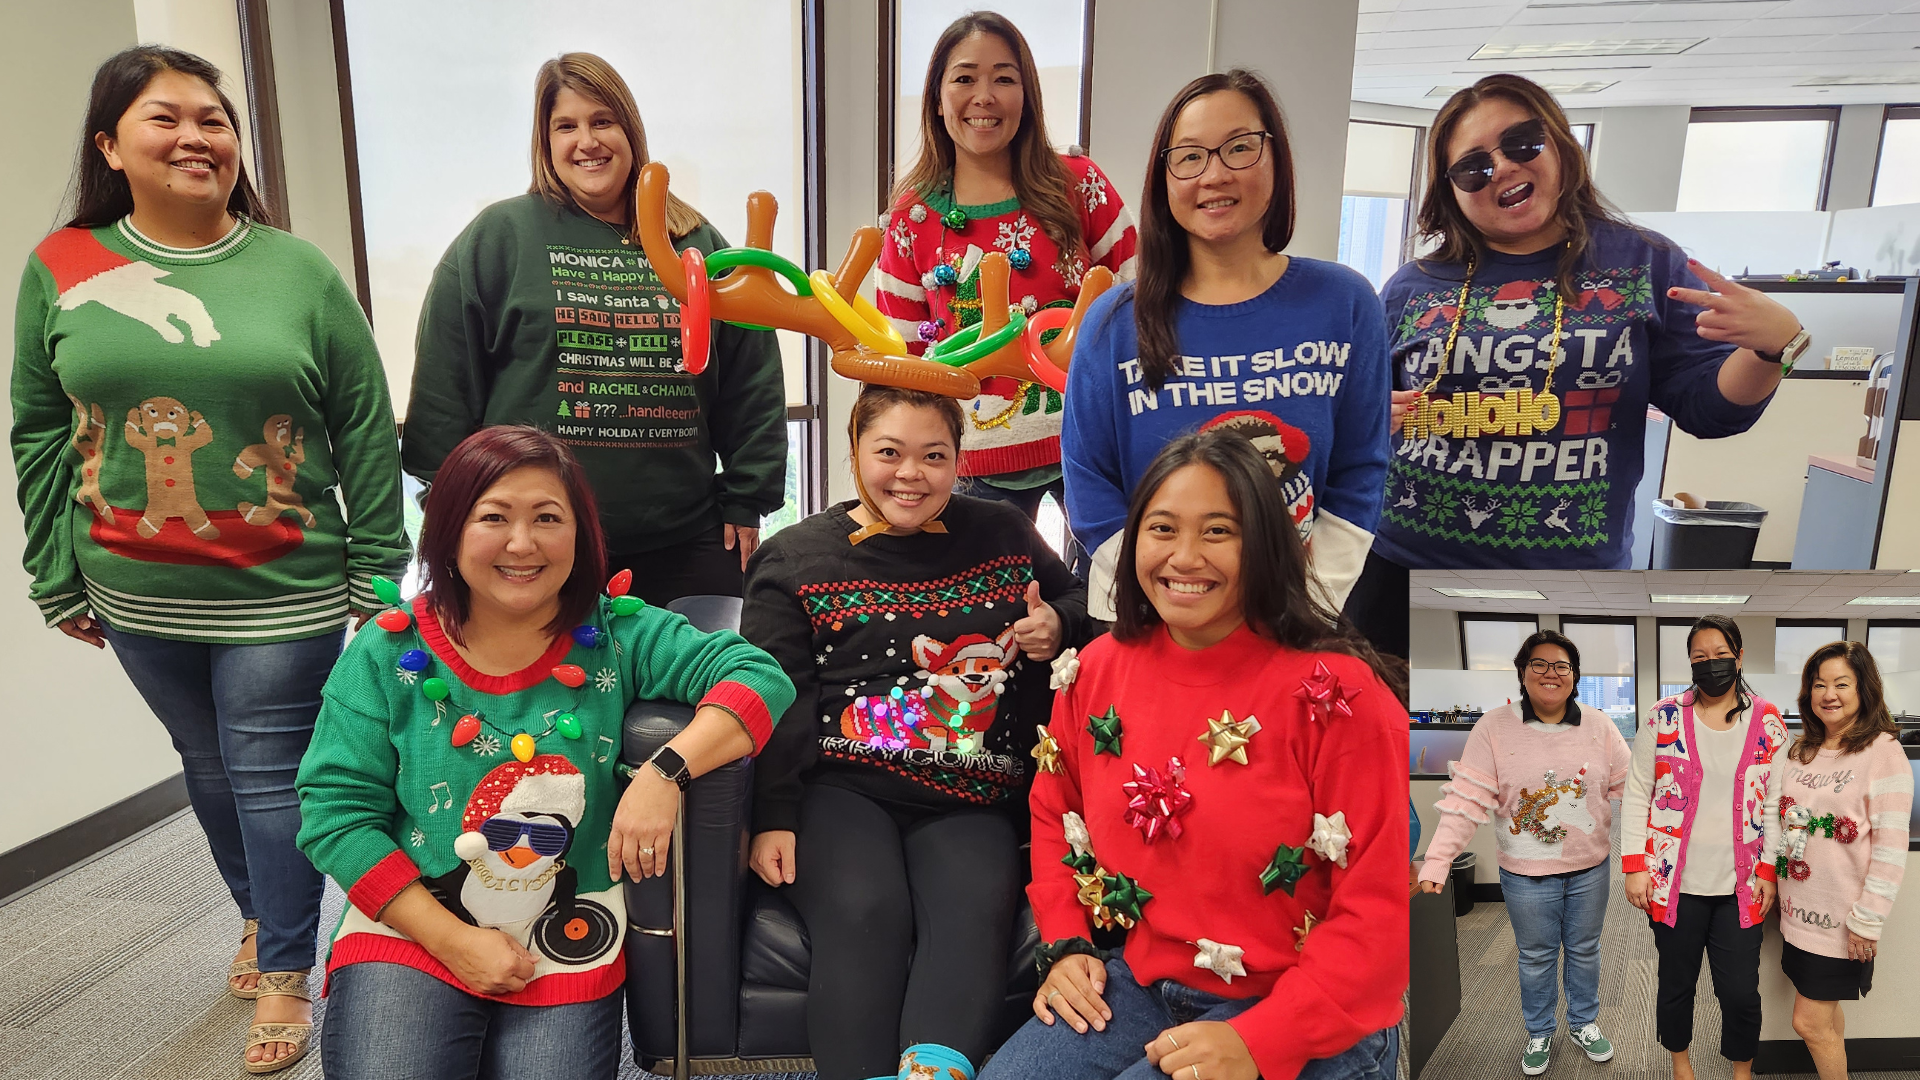 ugly sweater competition at atlas insurance with the winning member and runner up contestants